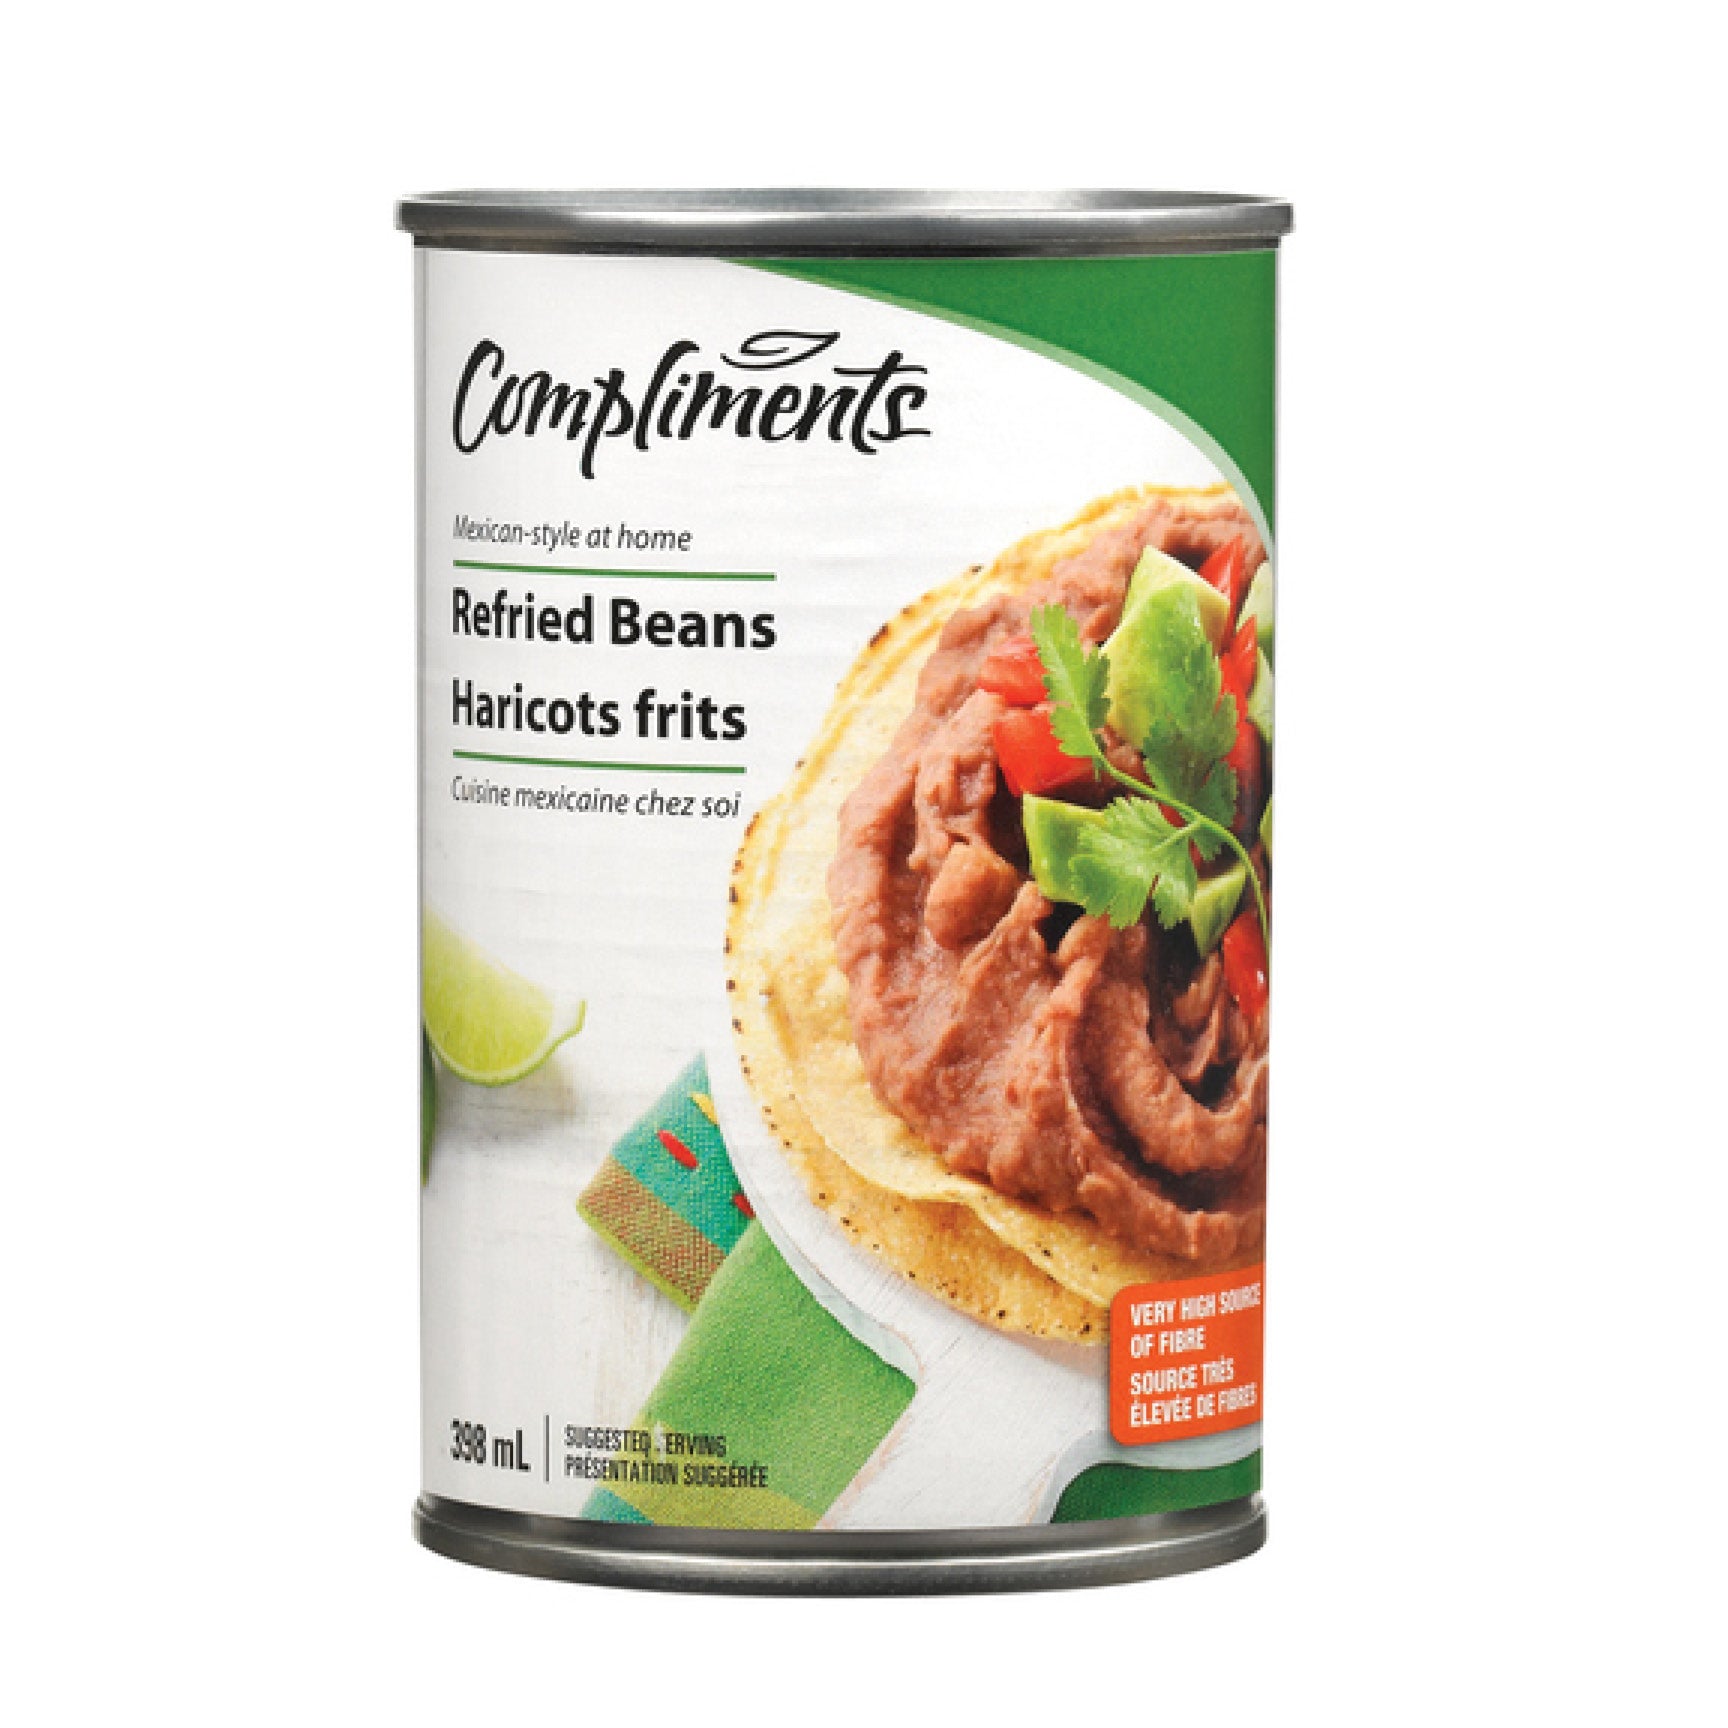 Compliments Refried Beans, 398ml